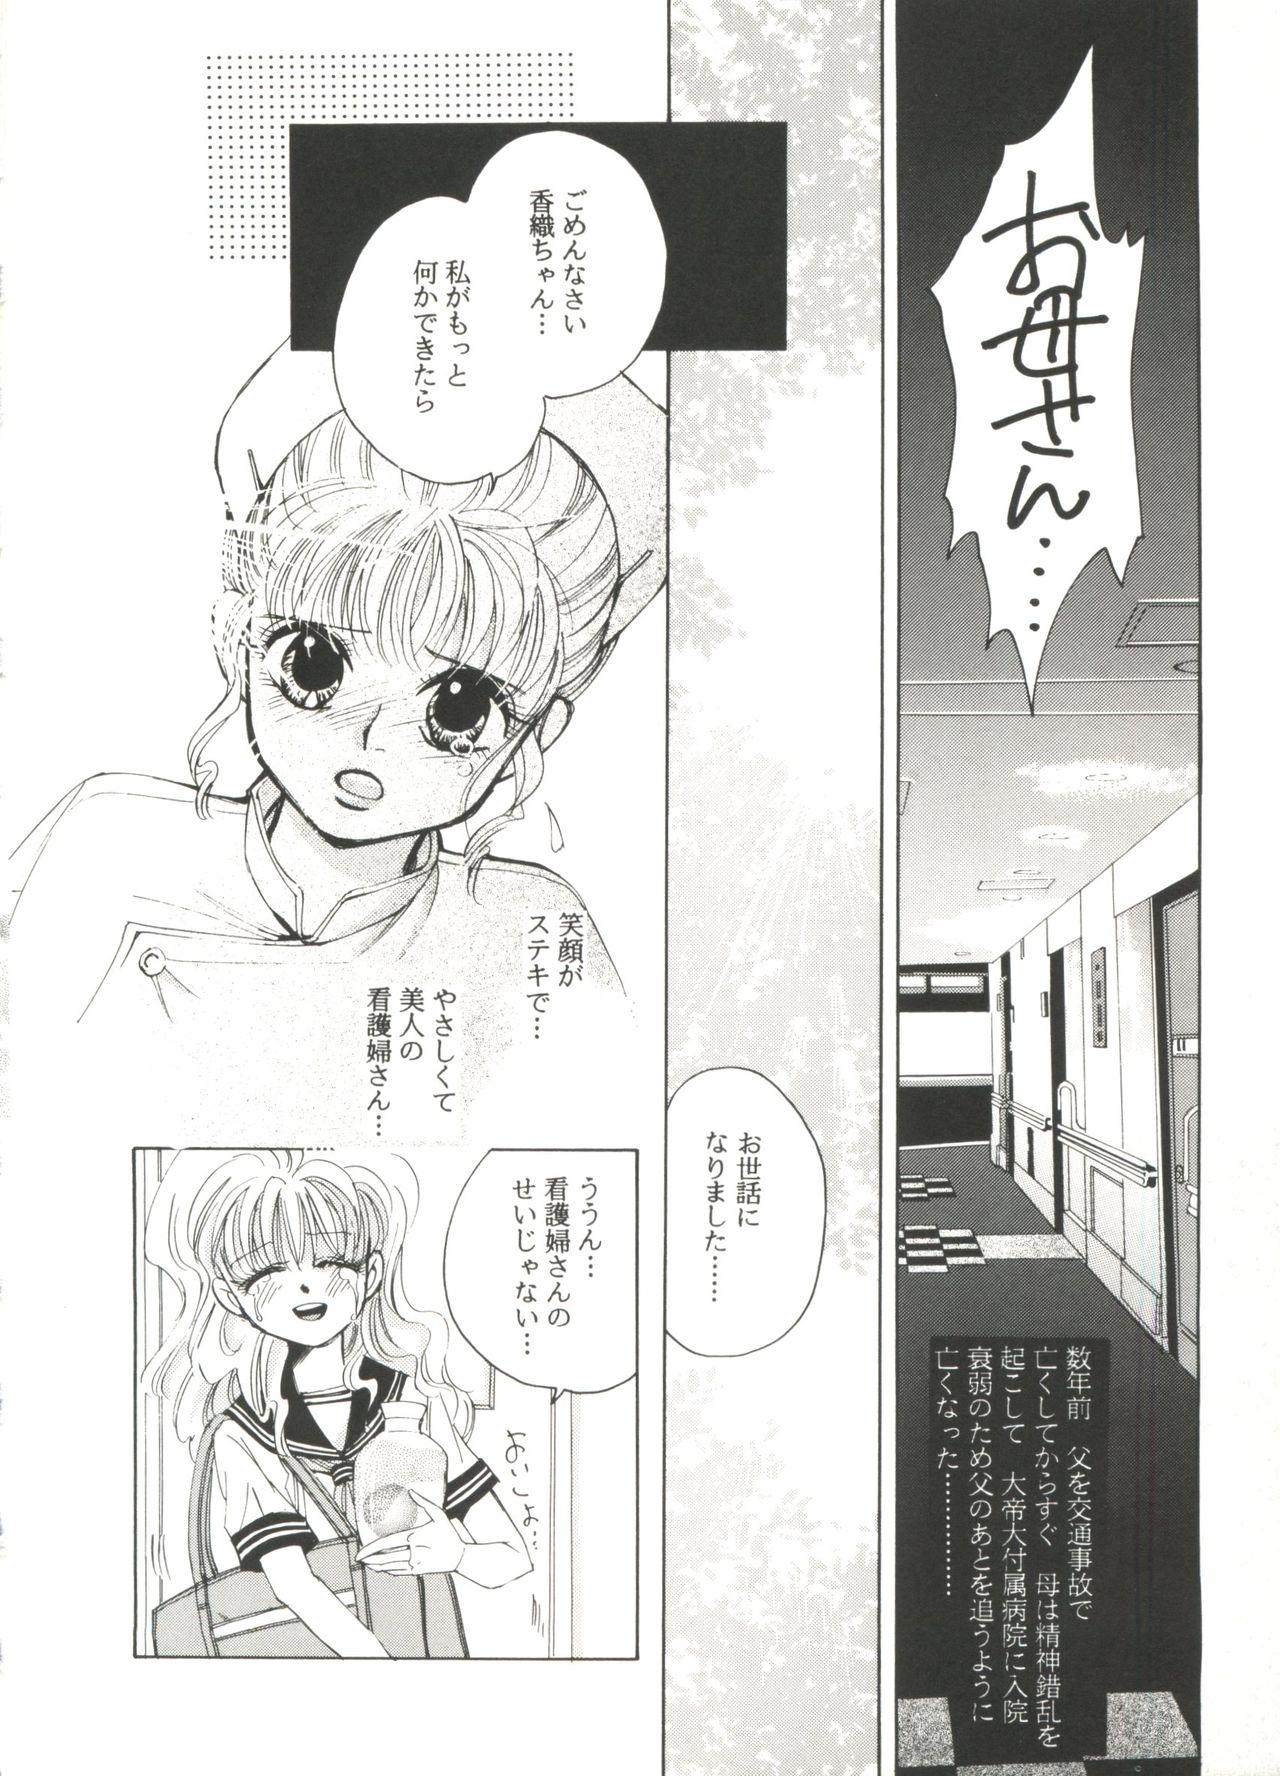 Amateur Sex Tapes Doujin Anthology Bishoujo a La Carte 8 - Sailor moon King of fighters Magic knight rayearth Battle athletes Saber marionette Kodomo no omocha Clitoris - Page 8